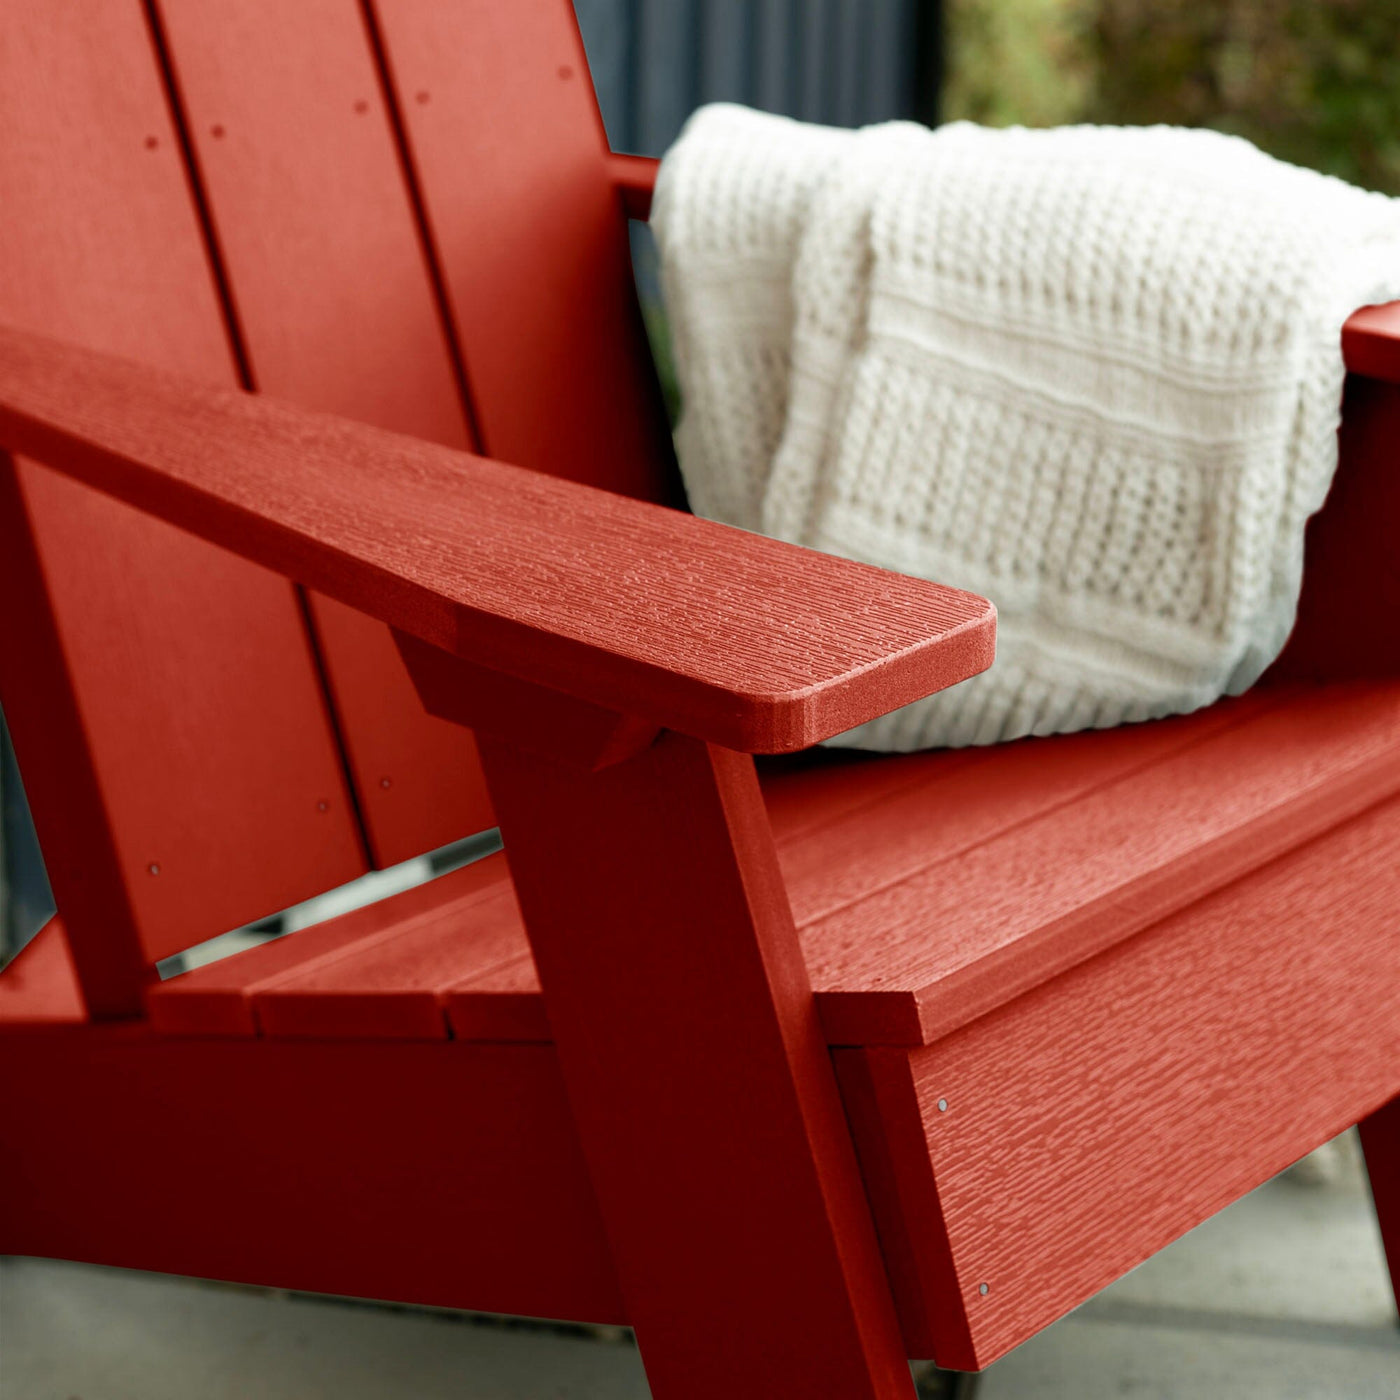 Close up of Red Italica Modern Adirondack Chair with blanket